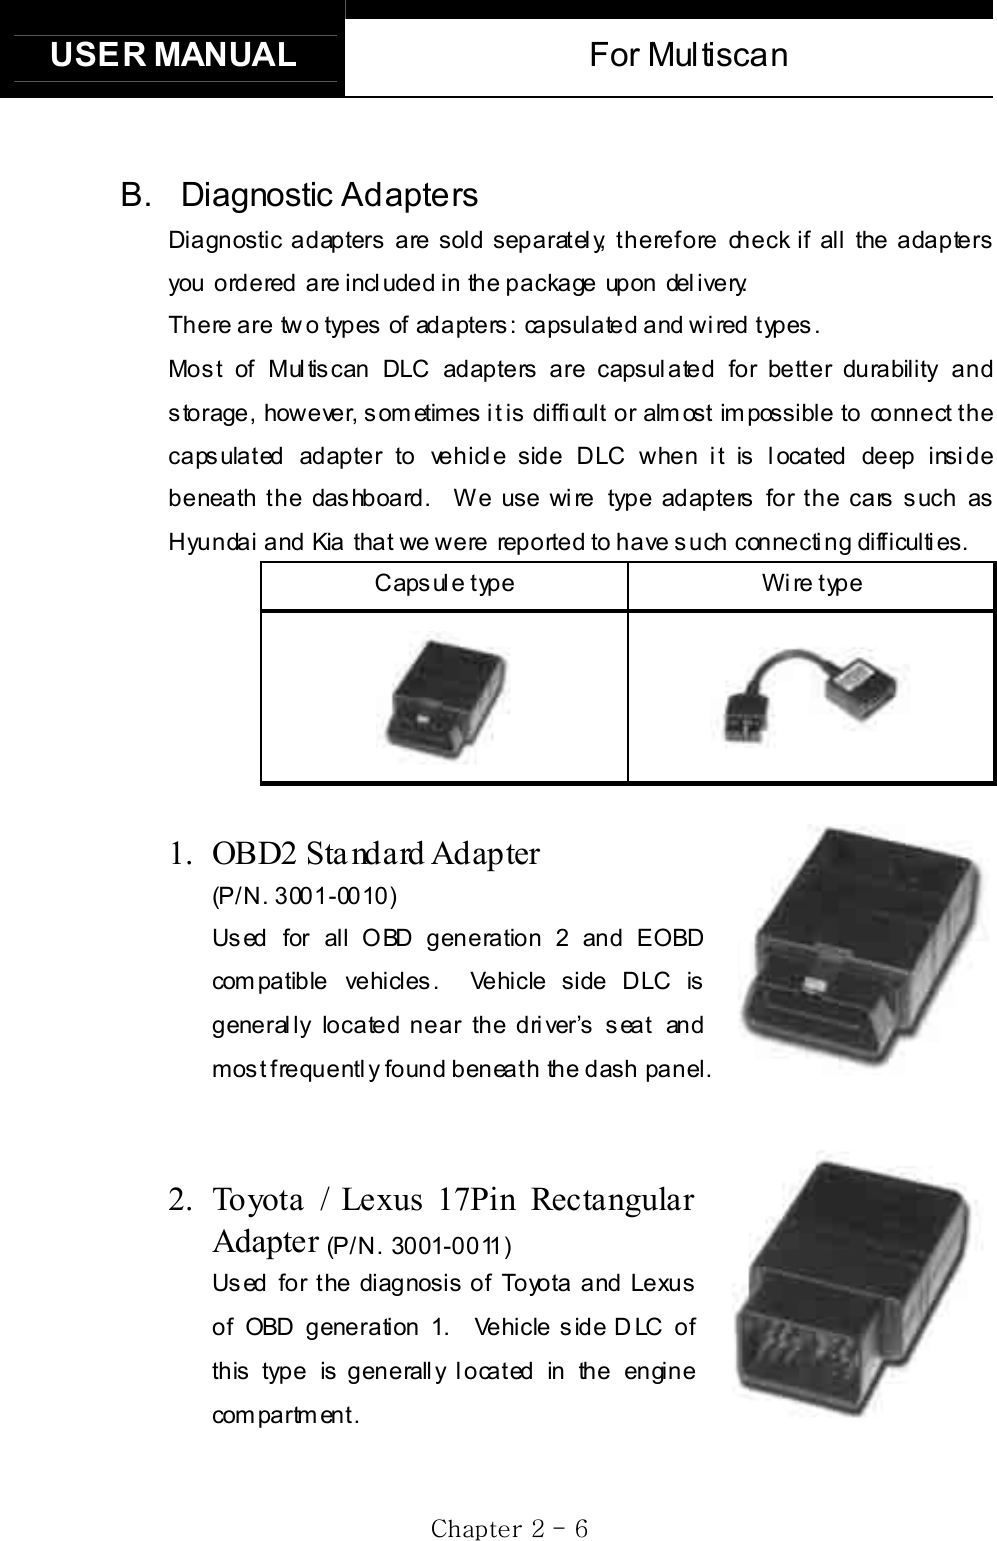 USER MANUAL  For Multiscan GjGYGTG ]GB. Diagnostic  Adapters Diagnostic adapters are sold separately, therefore check if all the adapters you ordered are included in the package upon delivery.    There are two types of adapters: capsulated and wired types.   Mos t of Mul tis can DLC adapters are capsul ated for bett er durability and s torage, however, s om etimes  i t is  diffi cult or alm ost im possible to connect  t he capsulated adapter to vehicle side DLC when it is located deep inside beneath t he das hboard.  W e use wi re type adapters  for t he cars s uch as Hyundai and Kia that we were reported to have such connecting difficulties.   Capsule type  Wire type 1. OBD2 Sta ndard Adapter  (P/N. 3001-0010)Used for all OBD generation 2 and EOBD com pa tible  ve hicl es .  Vehi cle  side  D LC  is generally located near the driver’s seat and most frequently  found beneath the dash panel. 2.  Toyota / Lexus 17Pin Rectangular Adapter (P/ N. 3001-0011)Us ed for t he diagnosis  of  Toyota and Lexus of OBD generation 1.   Vehicle s ide D LC  of this type is generally located in the engine com pa rtm en t .  